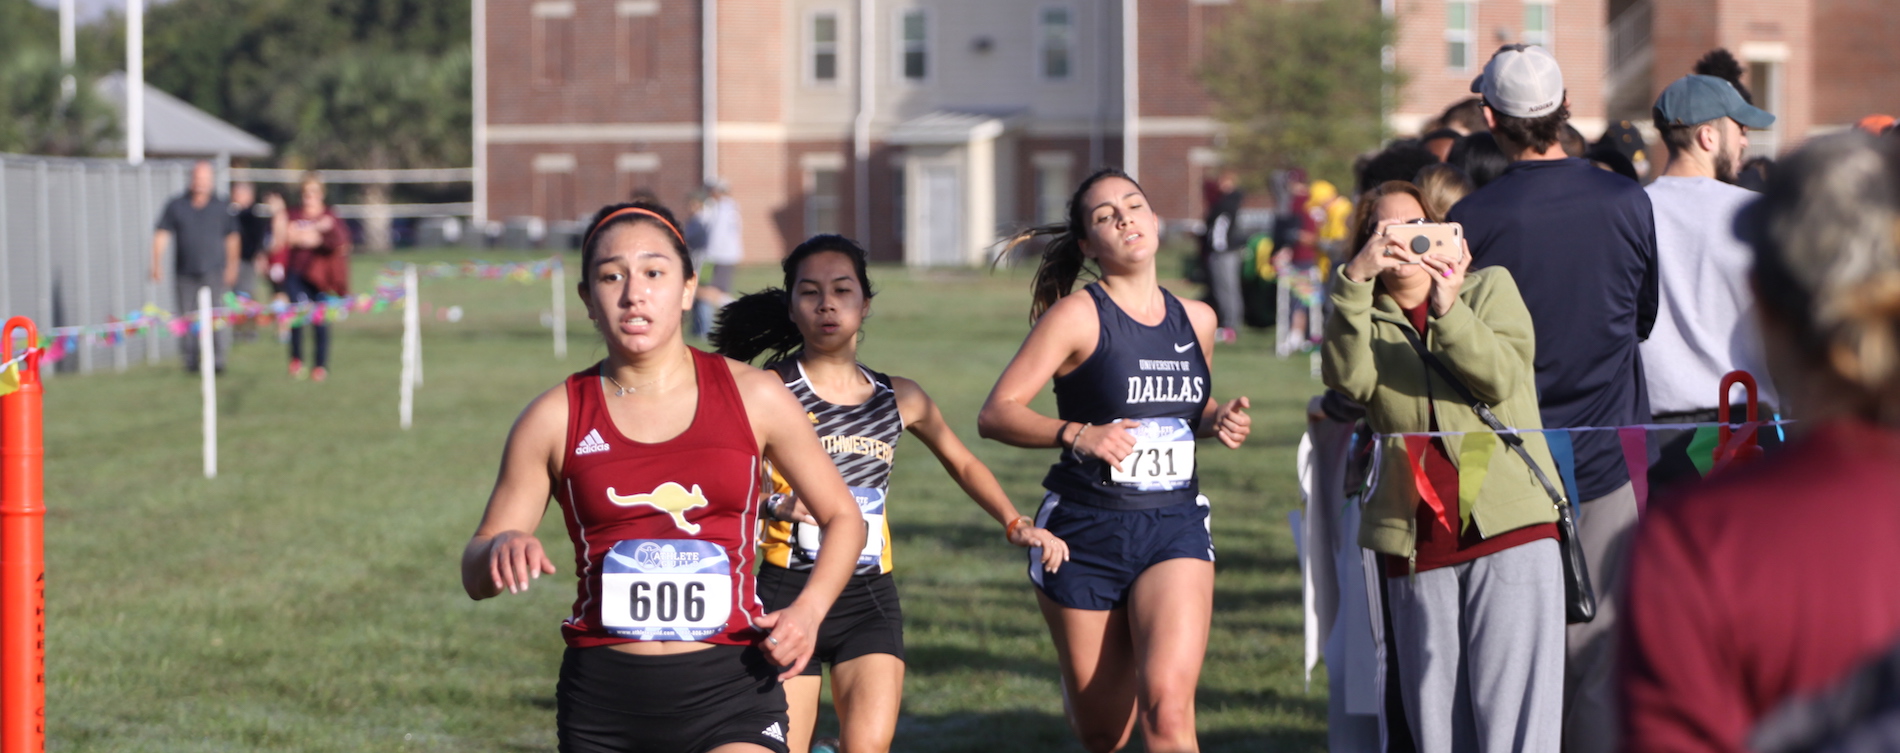 'Roos Place 6th at SCAC Championship Meet